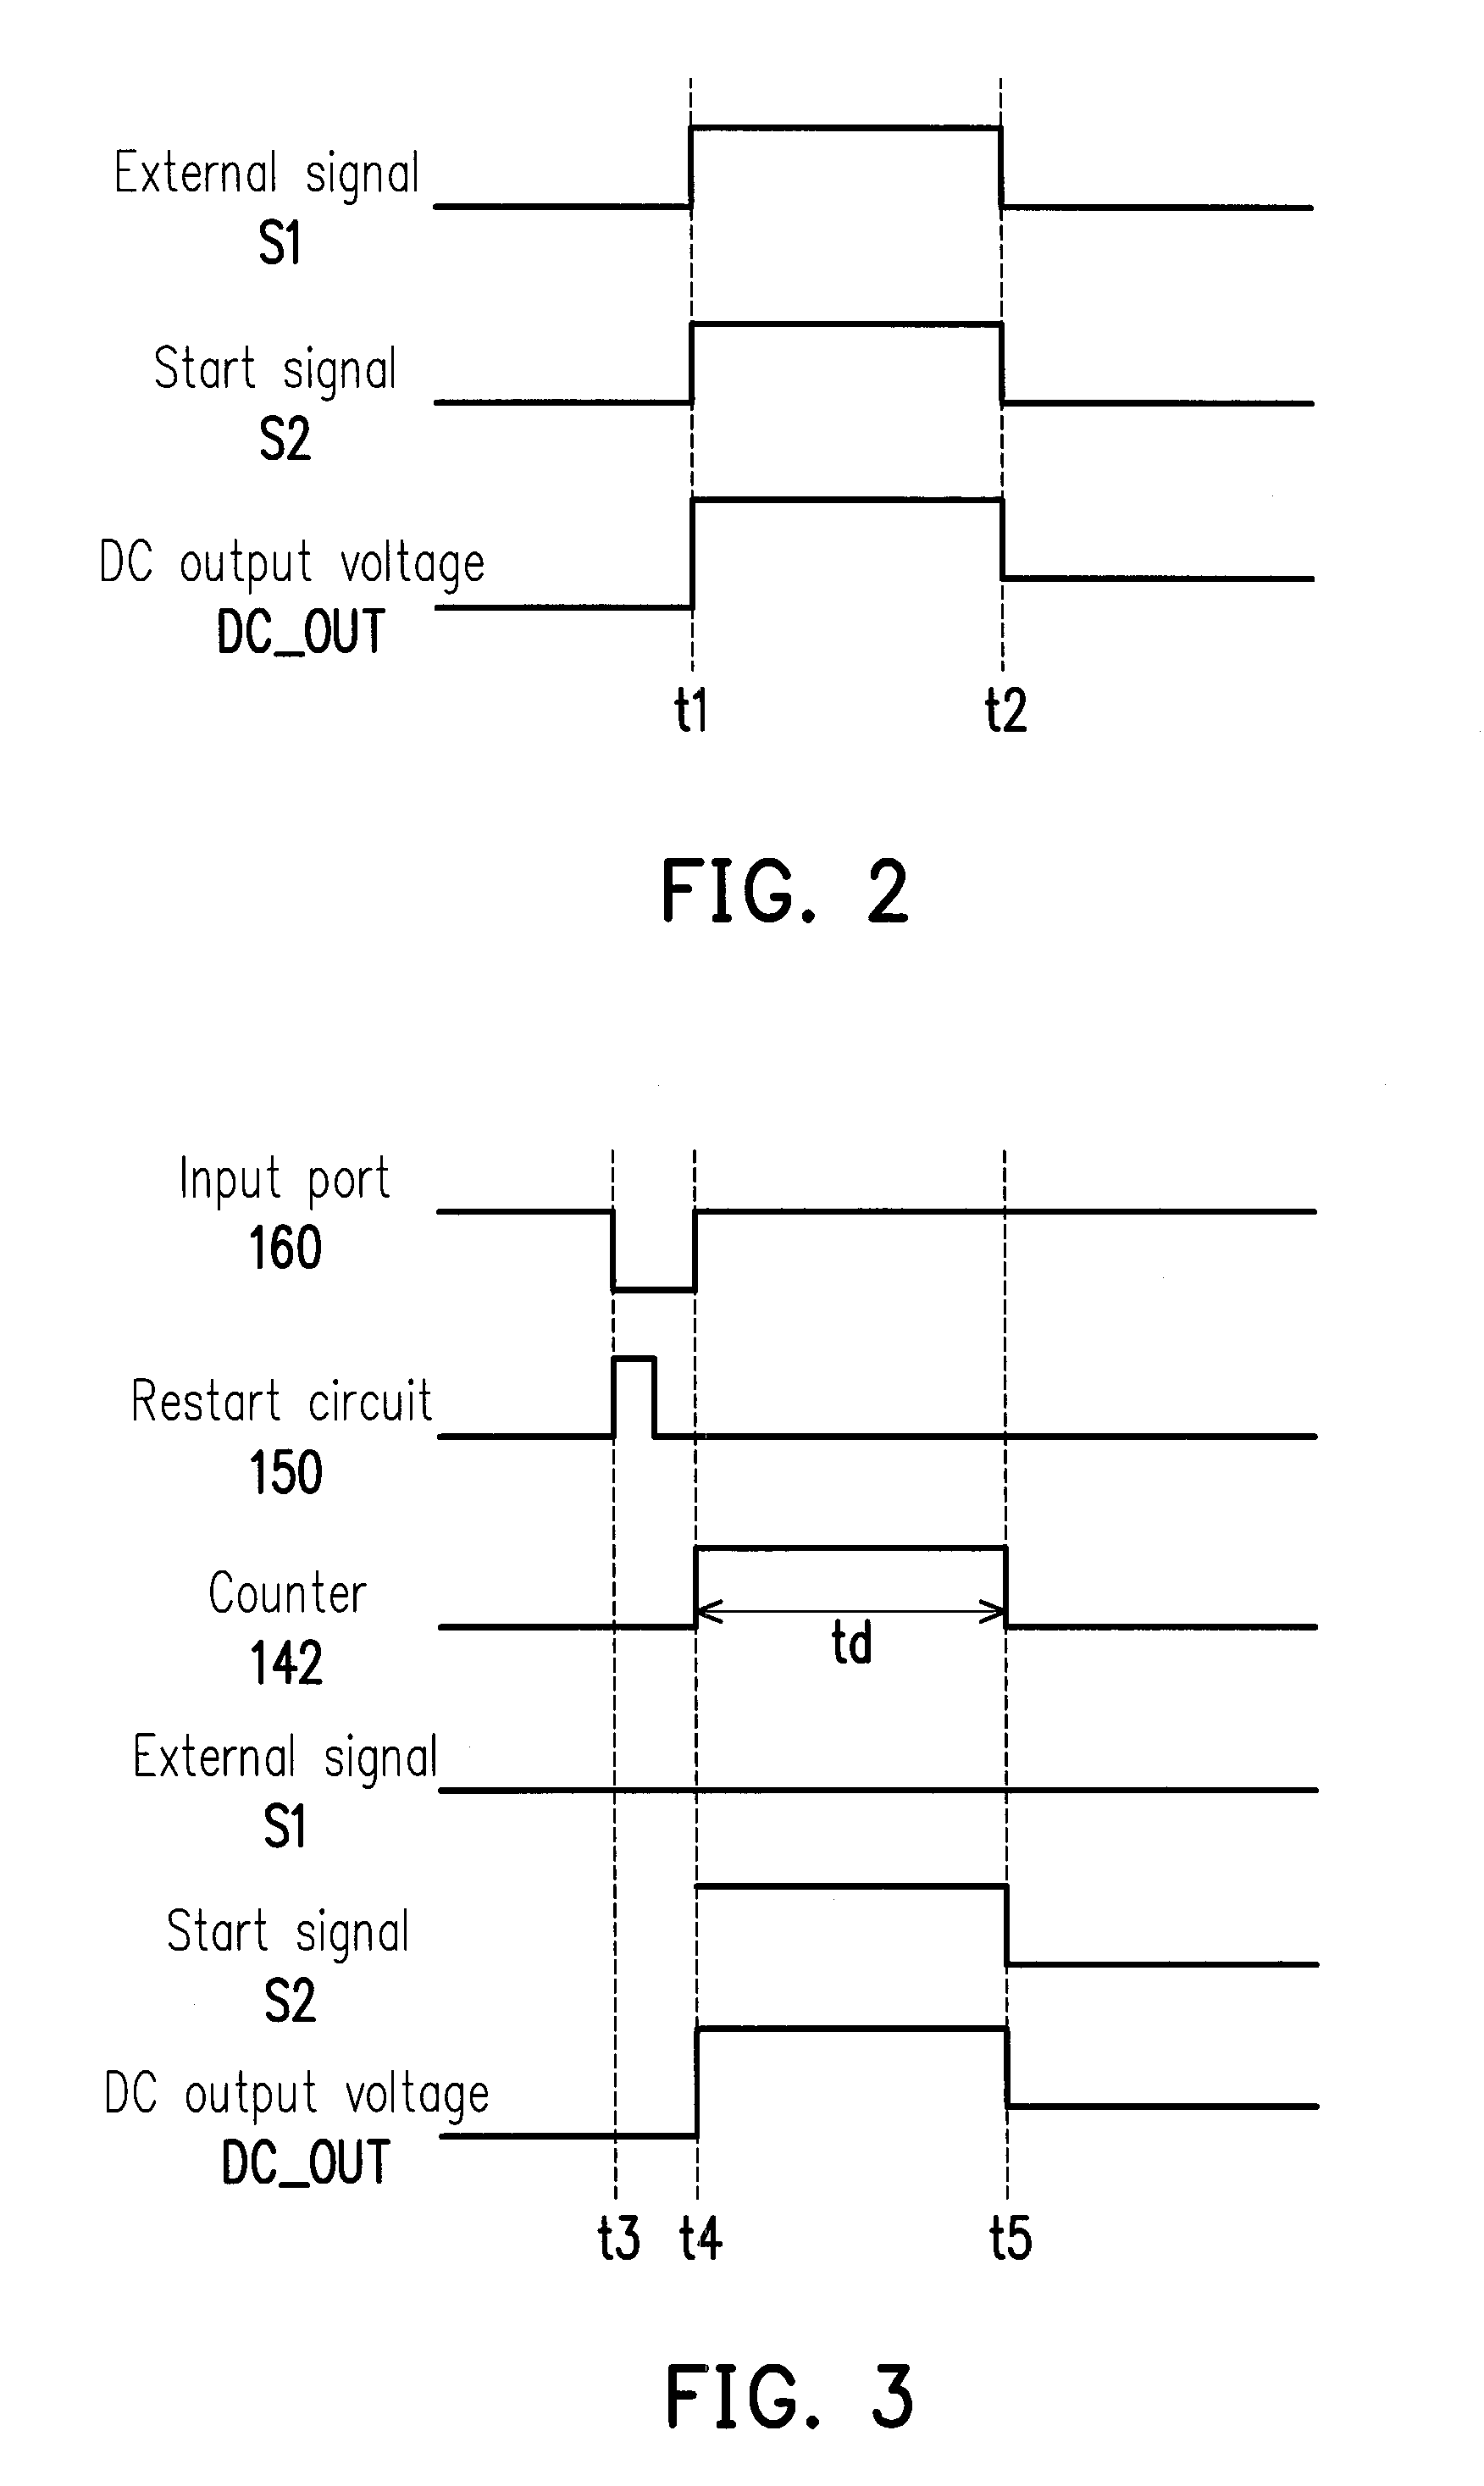 Power conversion apparatus for electronic apparatus